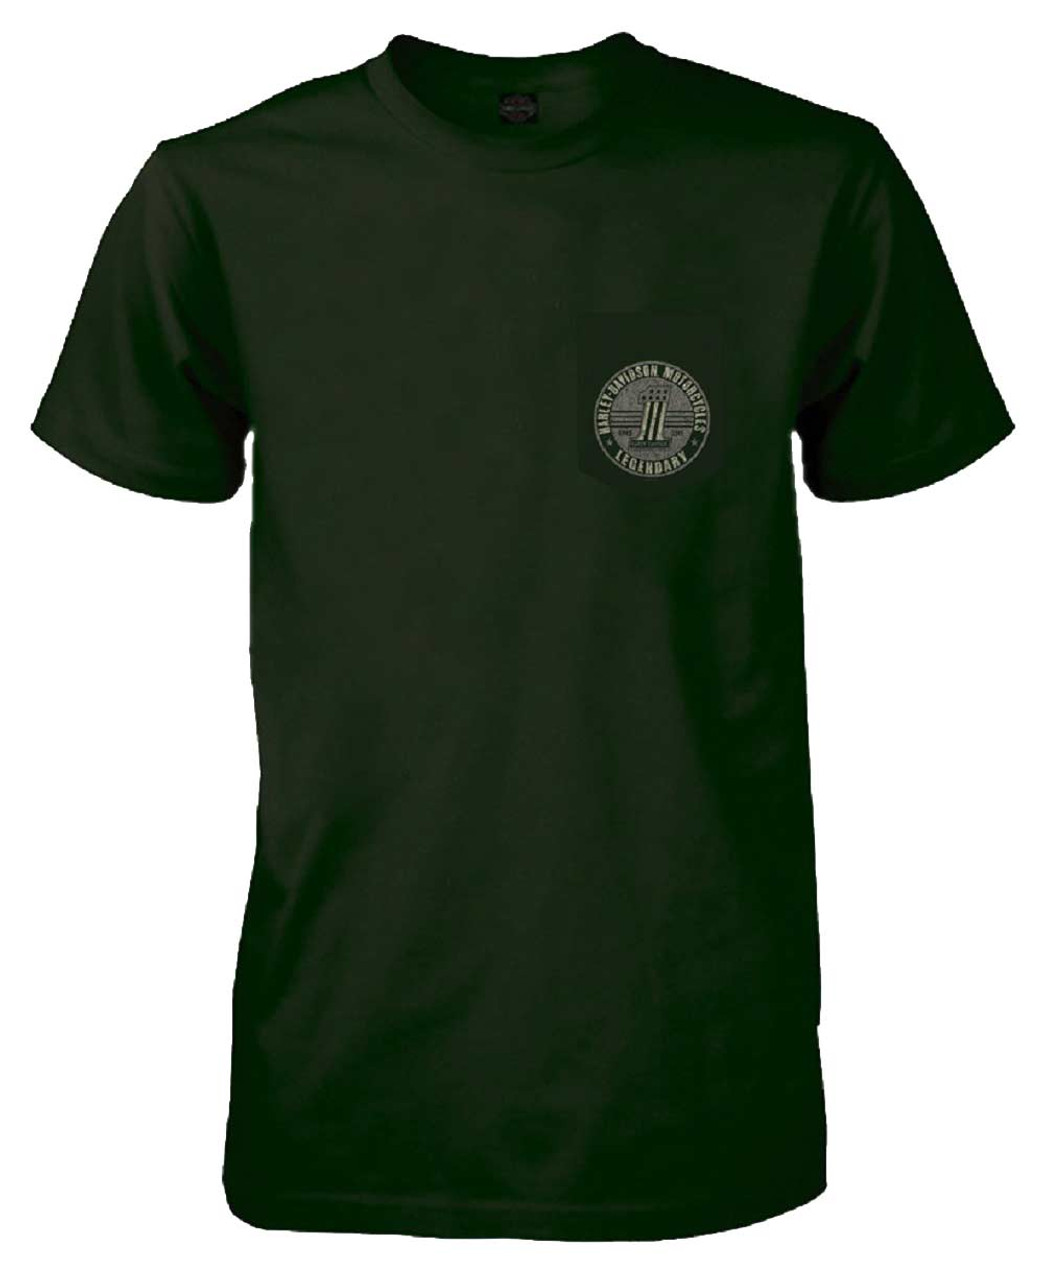 Harley Davidson® Mens Only One Short Sleeve Chest Pocket T Shirt Forest Green Wisconsin 